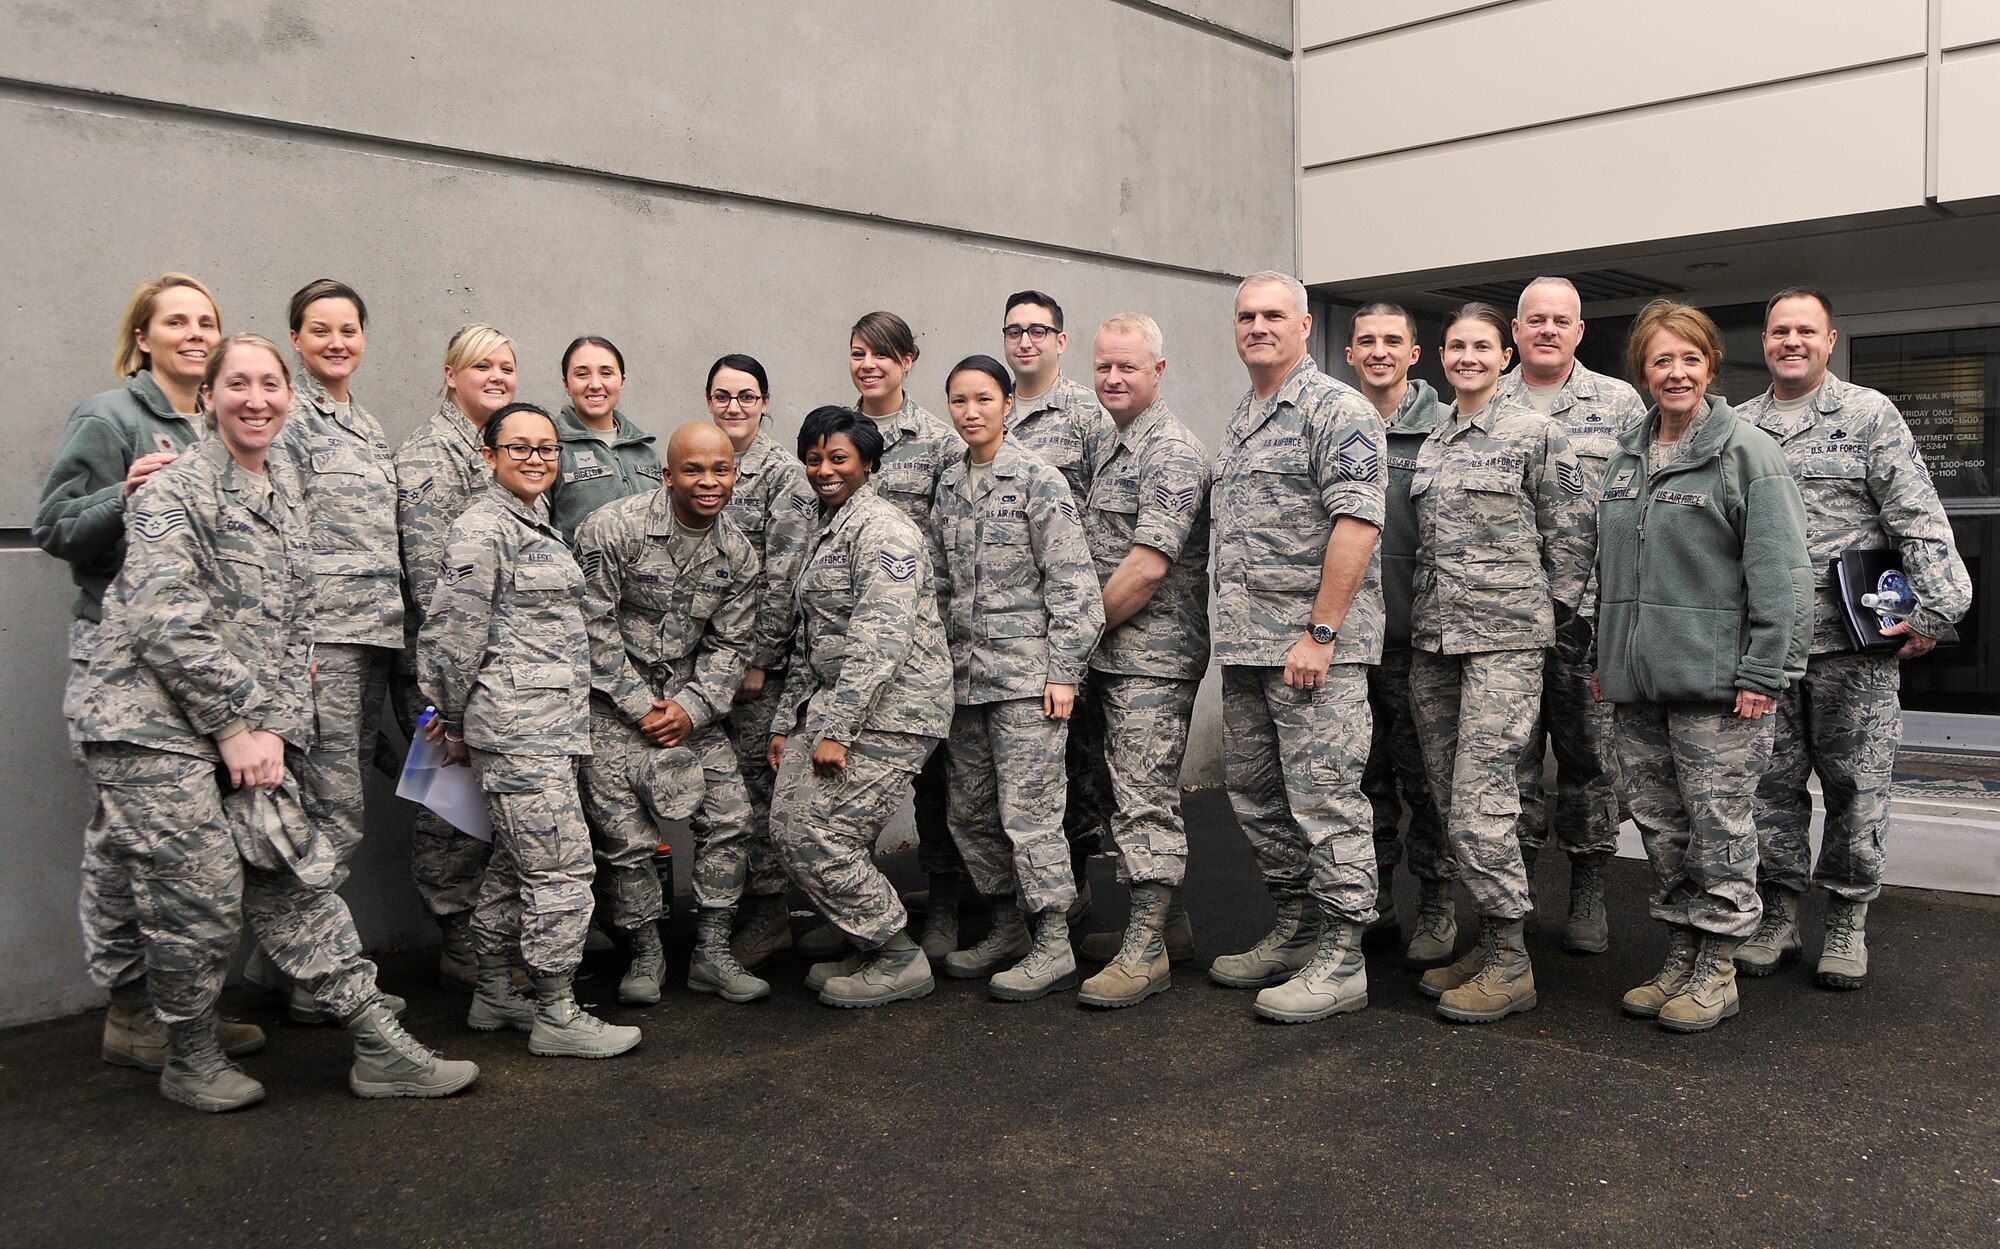 Members of the Oregon Air National Guard’s Diversity and Inclusion Counsel gather for a group photograph following their monthly meeting during the Unit Training Assembly, Jan. 11, 2015, Portland Air National Guard Base, Ore. The Diversity and Inclusion Counsel helps foster communication by recognizing that a diverse set of experiences, perspectives, and backgrounds are crucial to mission success. (U.S. Air National Guard photo by Tech. Sgt. John Hughel, 142nd Fighter Wing Public Affairs/Released)